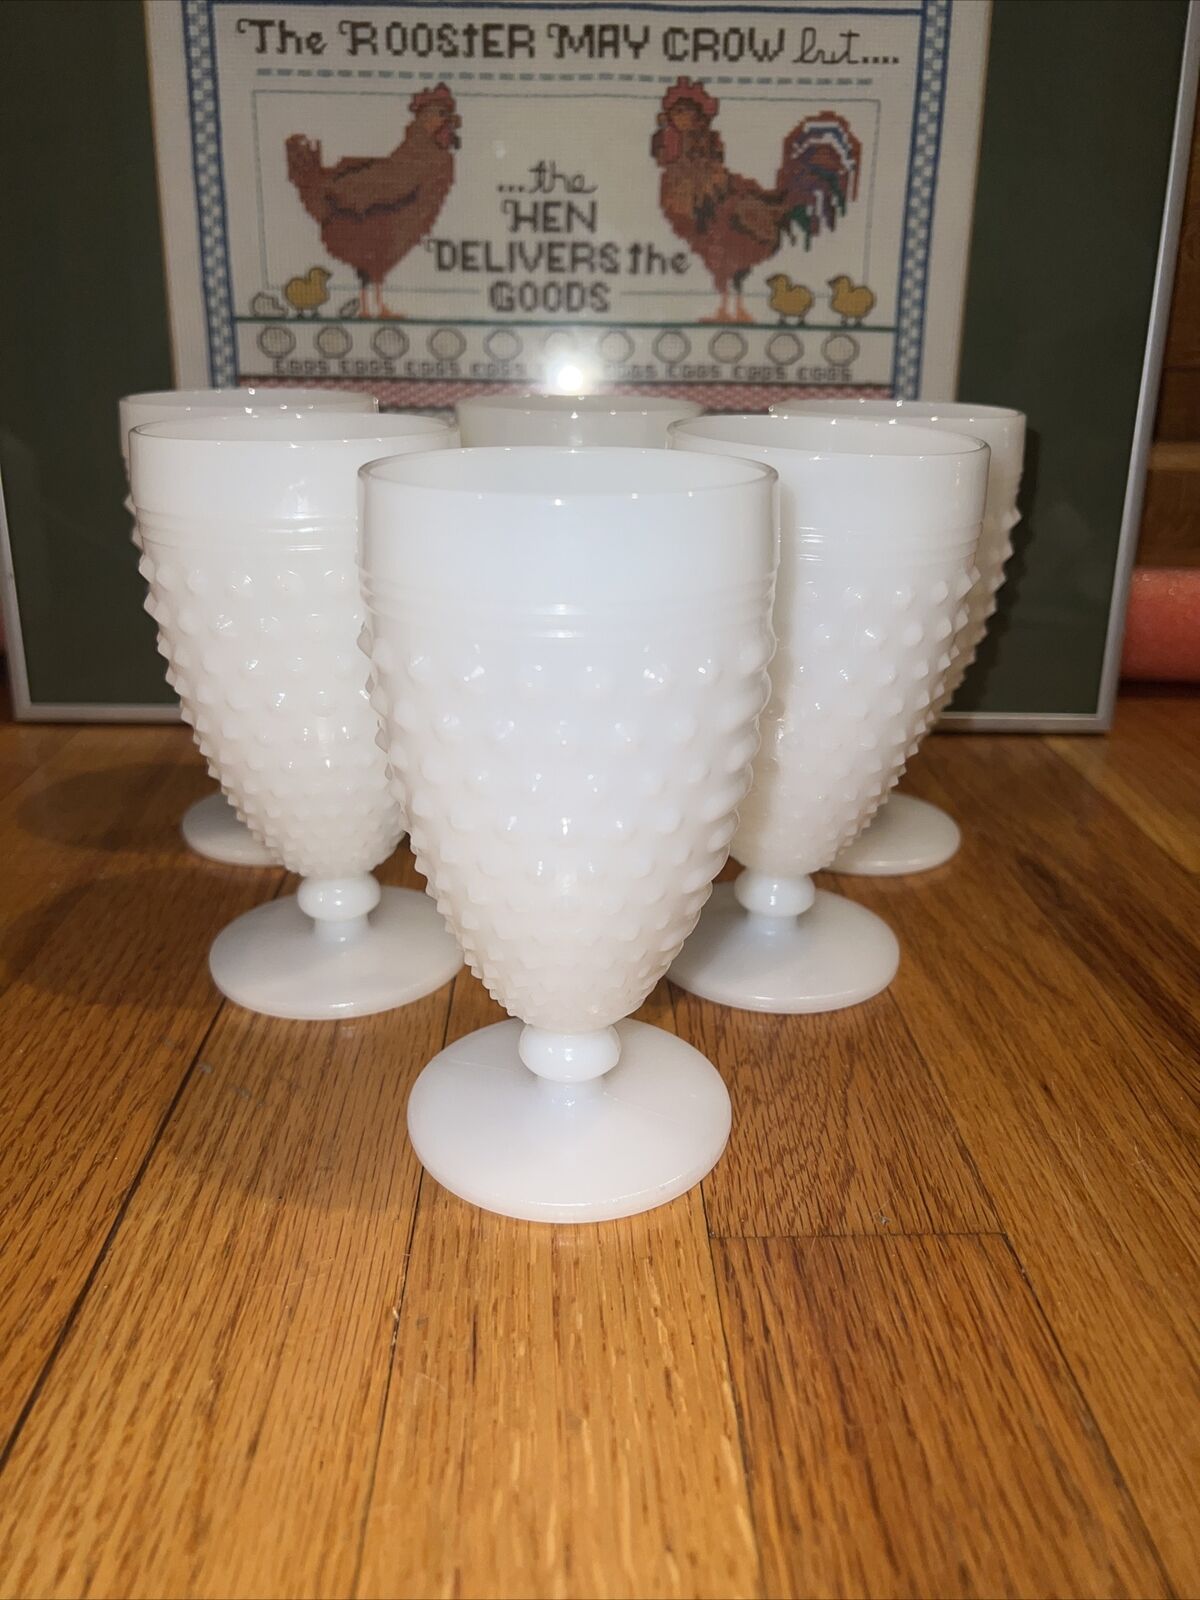 6 Anchor Hocking Hobnail Milk Glass Water Goblets With Ladder